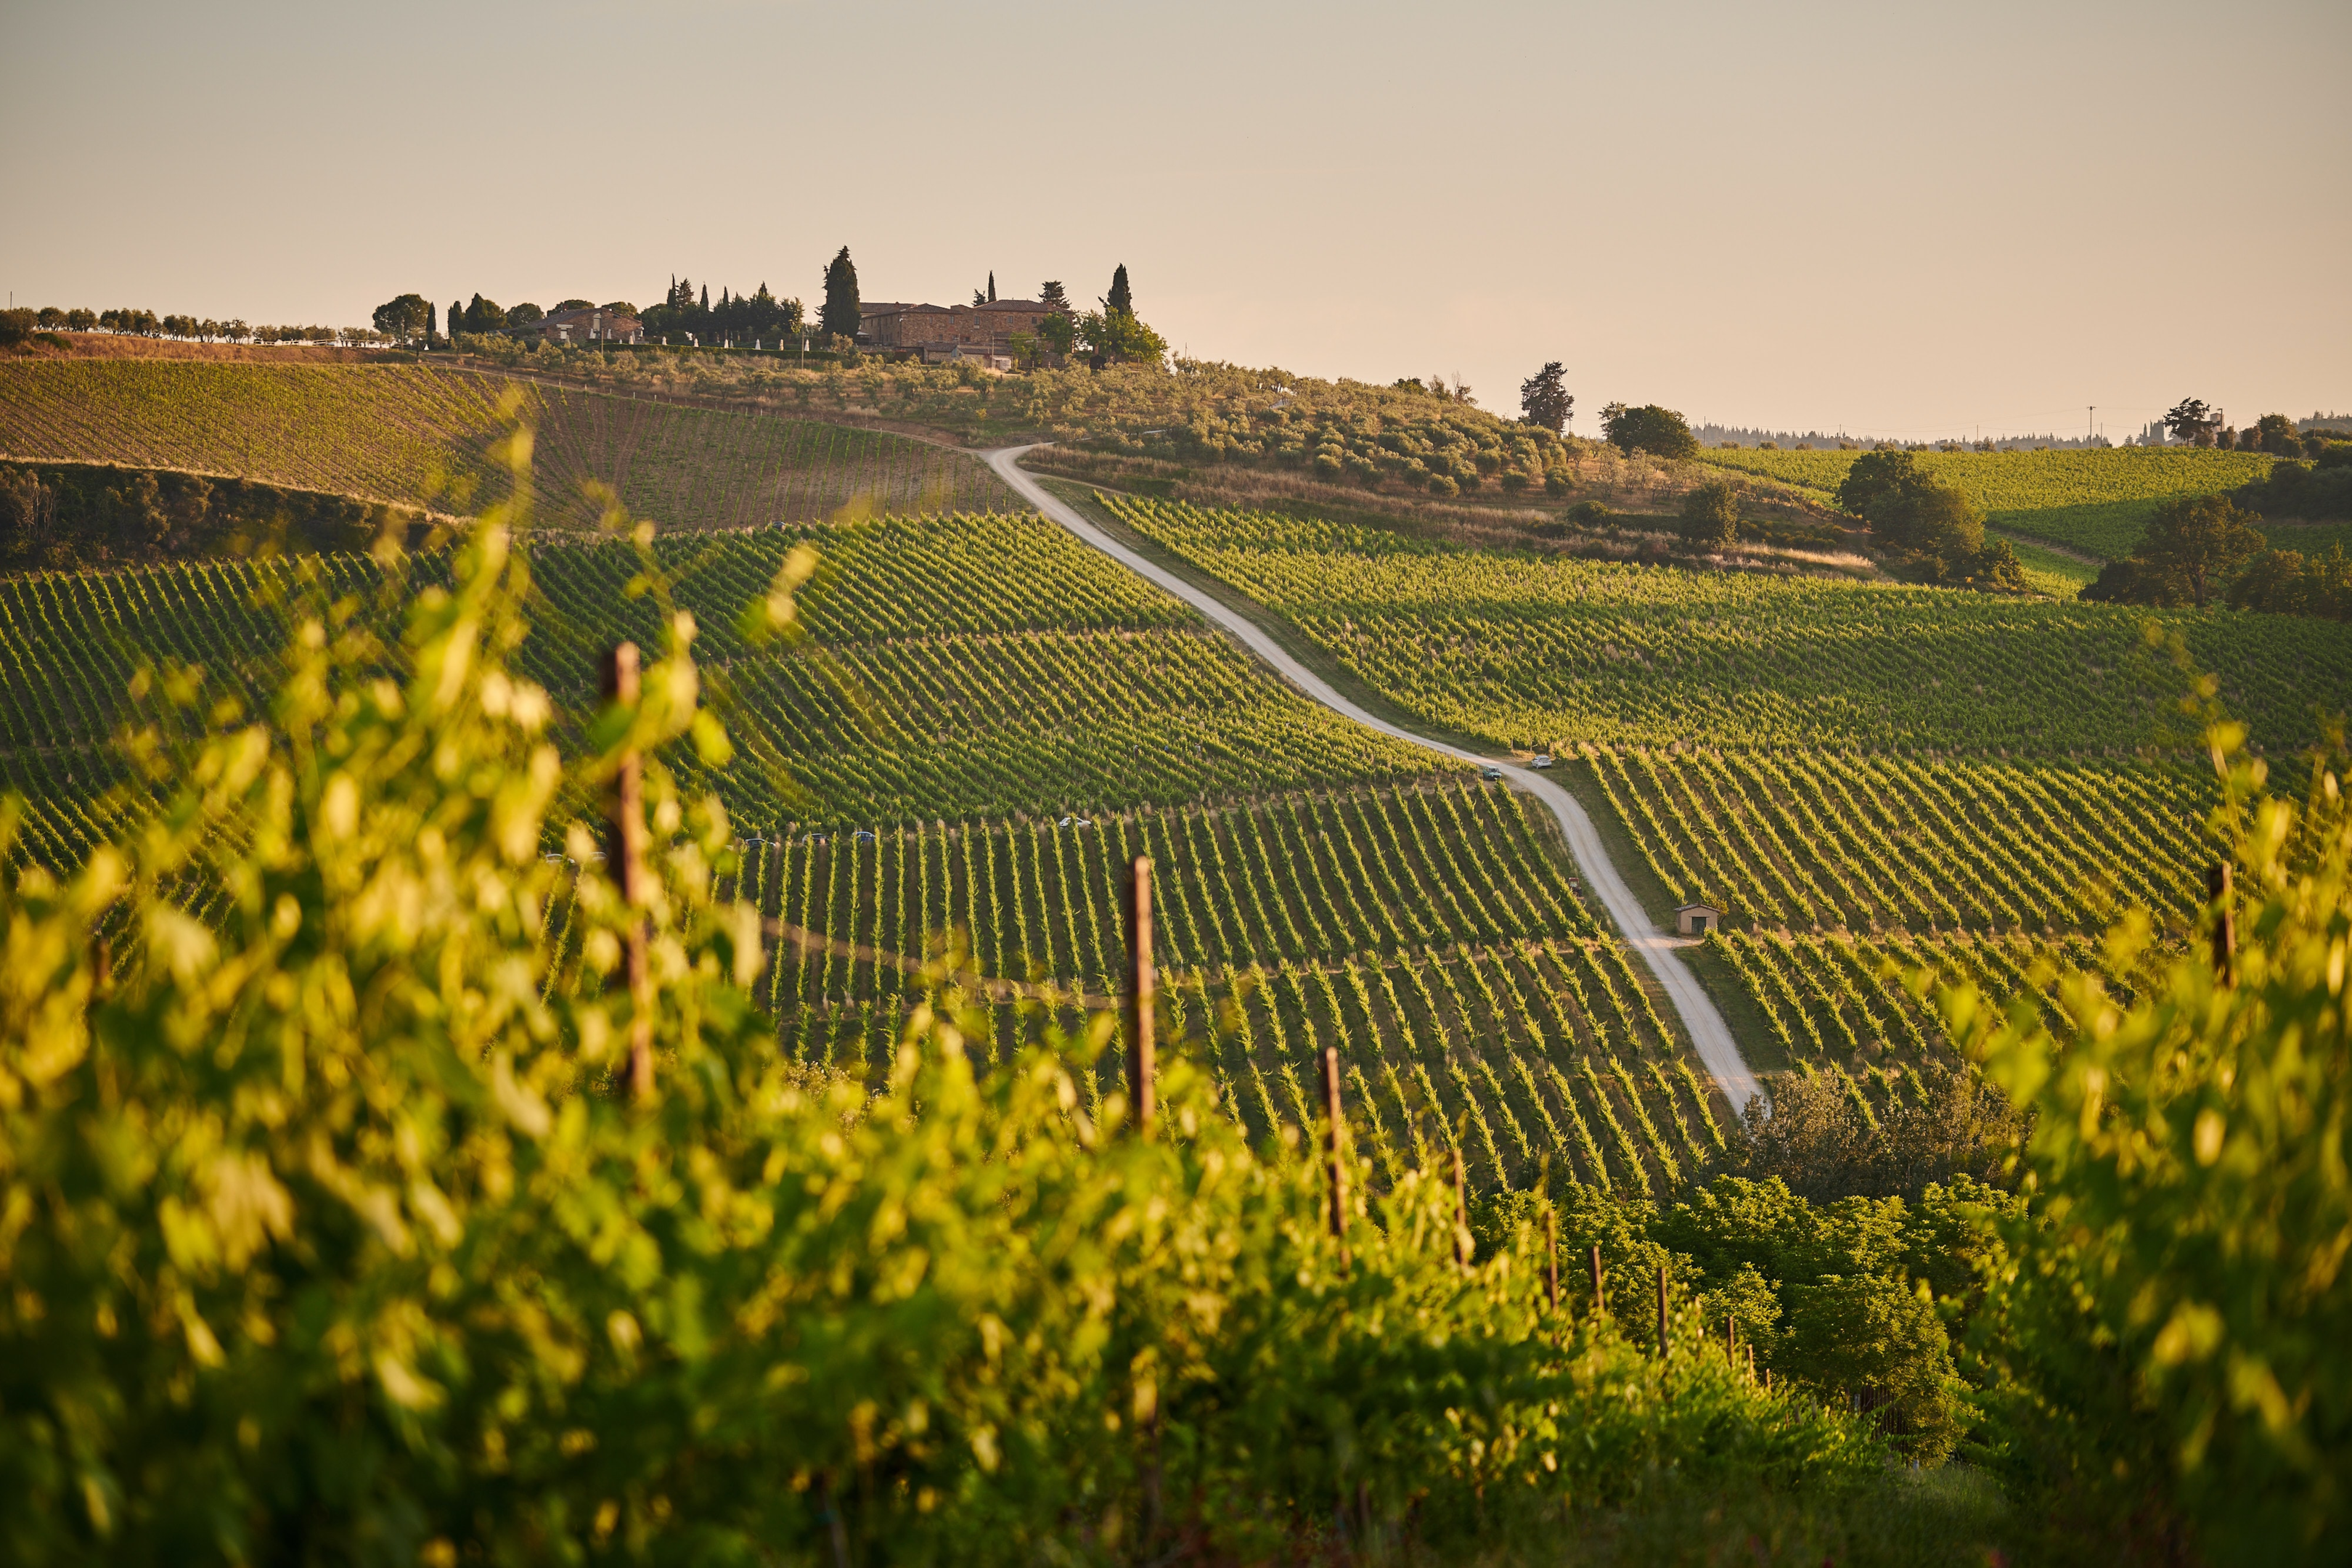 ALT: green vineyards during day time. | IMG LINK: https://images.unsplash.com/photo-1596142332133-327e2a0ff006?ixlib=rb-1.2.1&ixid=MnwxMjA3fDB8MHxwaG90by1wYWdlfHx8fGVufDB8fHx8&auto=format&fit=crop&w=870&q=80